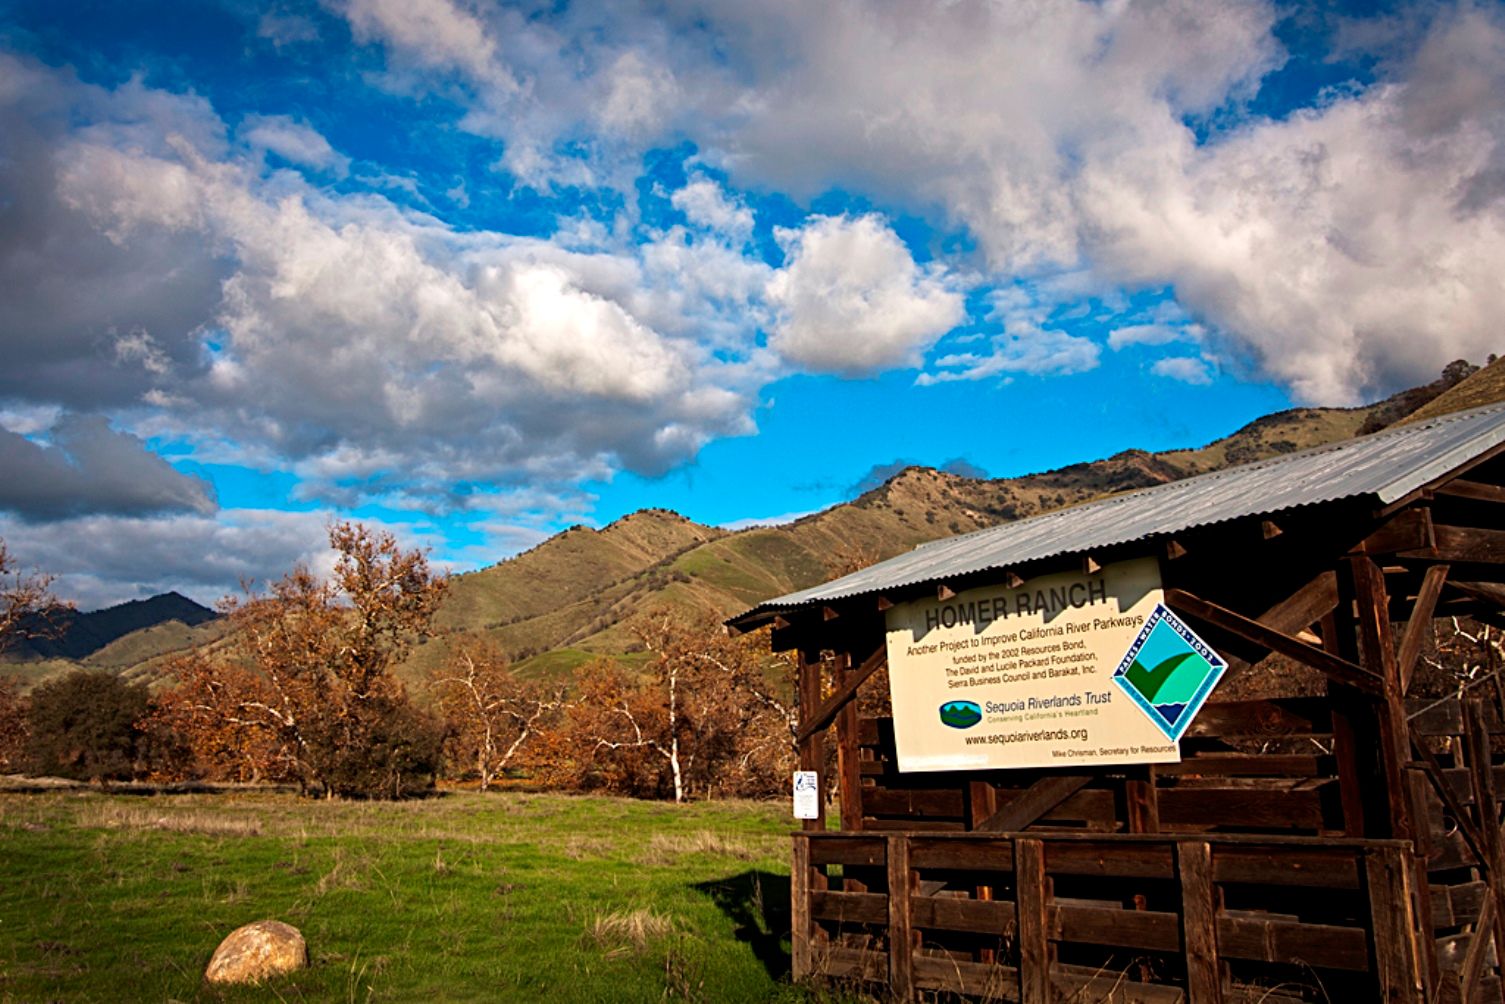 Homer Ranch Preserve reopened for weekends